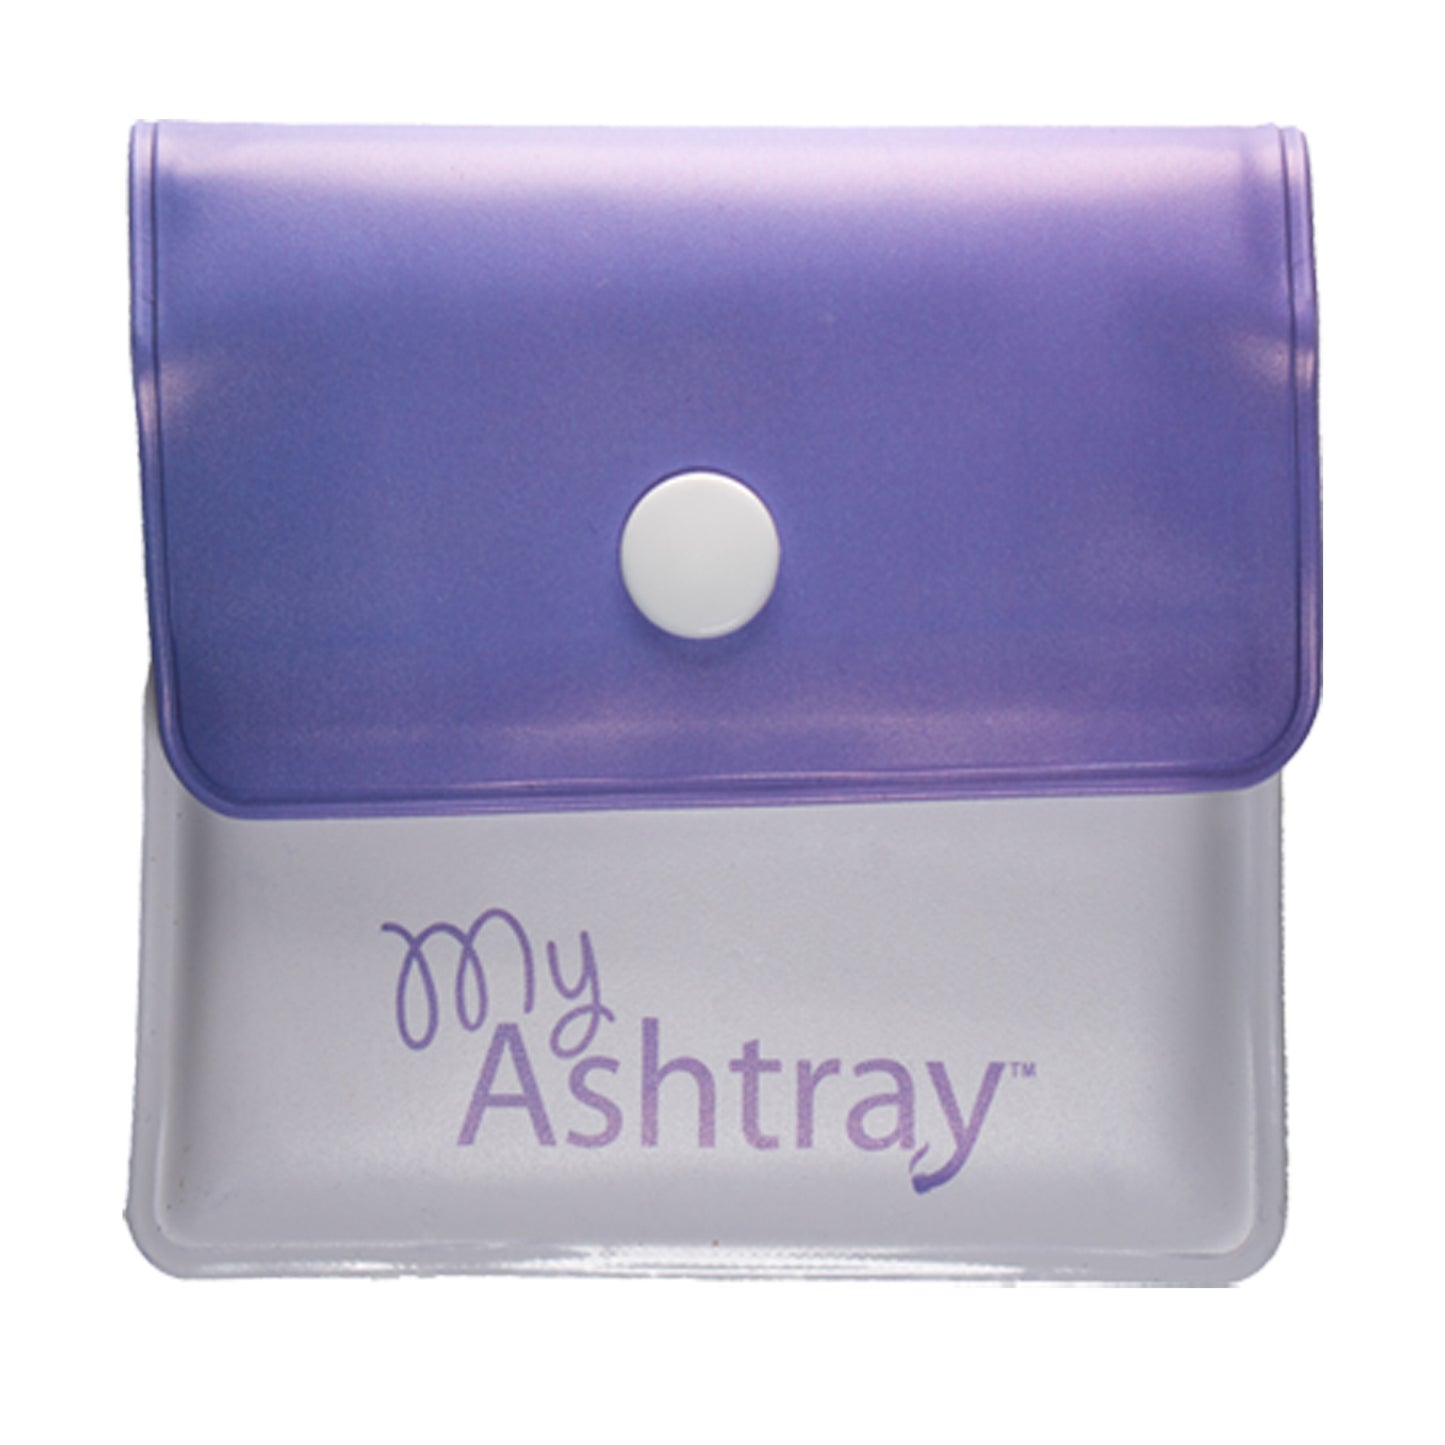 Portable Pocket Ashtray - Smell Proof PVC Small Plastic Wallets with Sturdy Plastic Button, Fireproof Lining, Aluminium Foil, Thermal Foam - Plastic Pouch